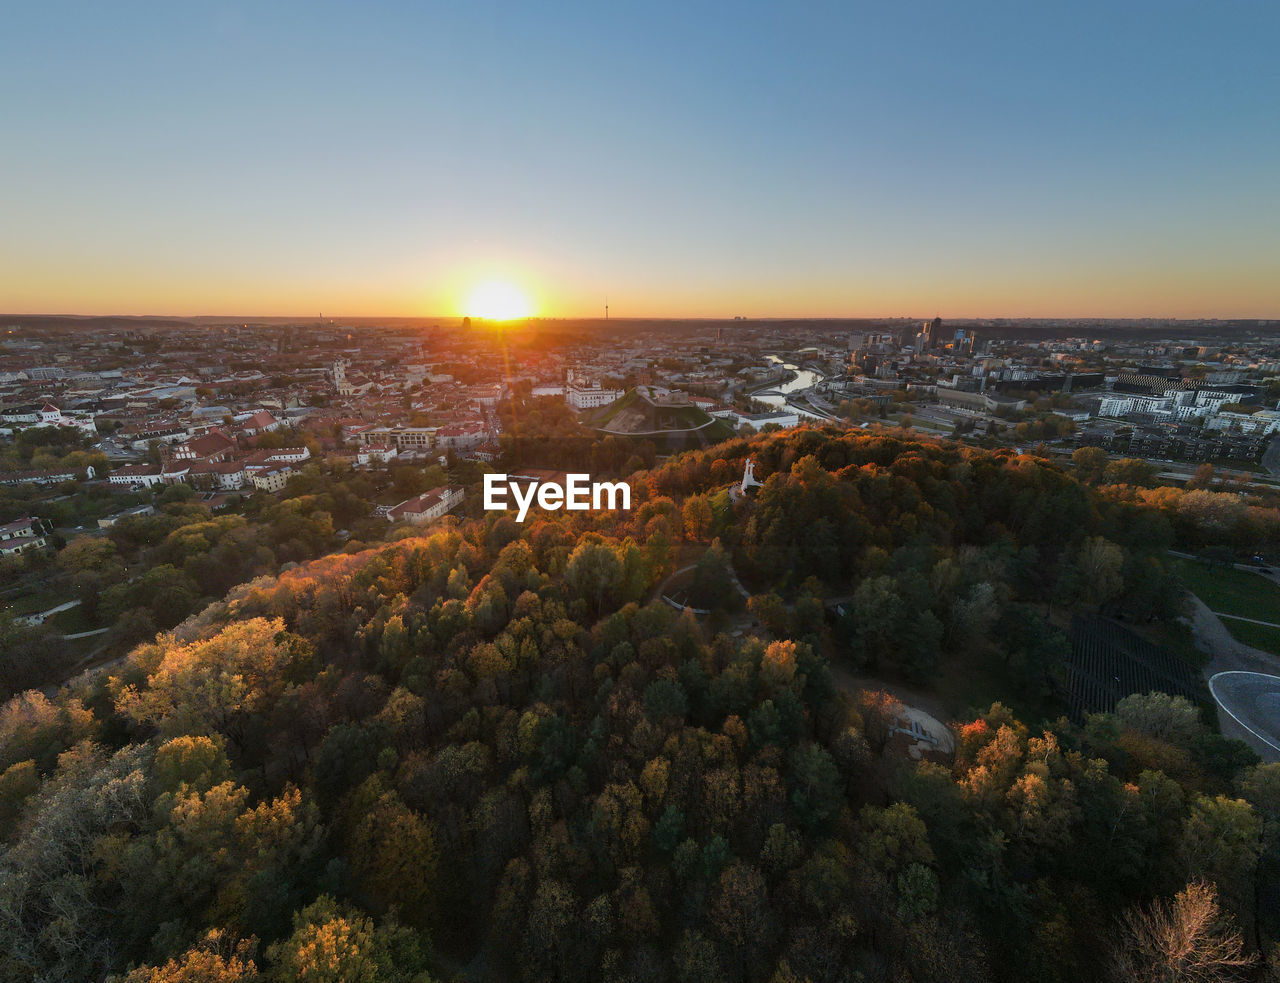 HIGH ANGLE VIEW OF CITYSCAPE DURING SUNSET